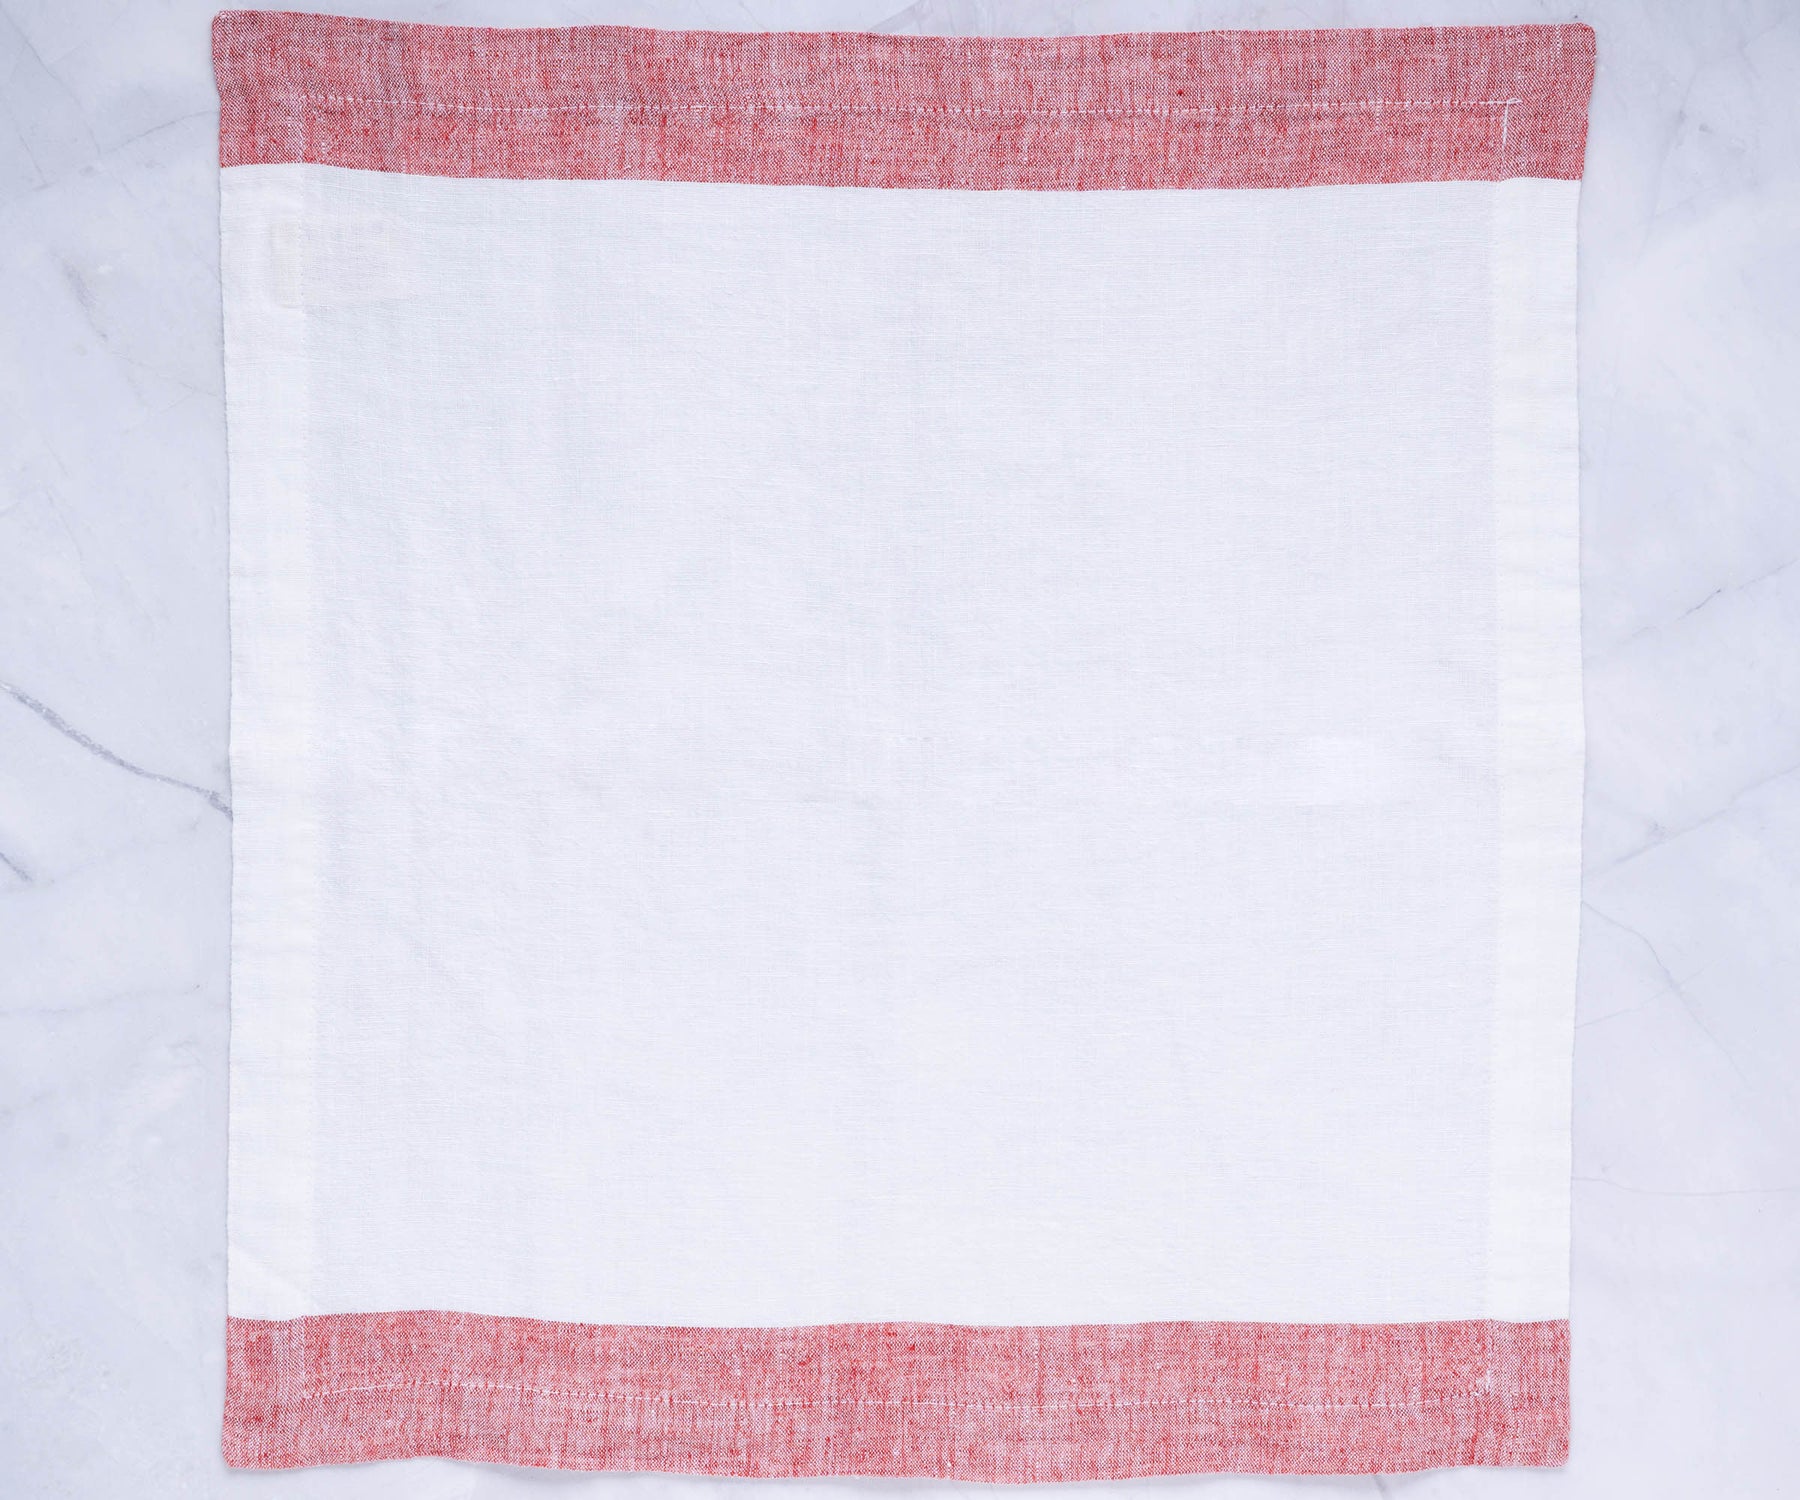 You can choose from a variety of cloth dinner napkins, including white and red options. These cloth napkins add a touch of elegance to your dining experience.